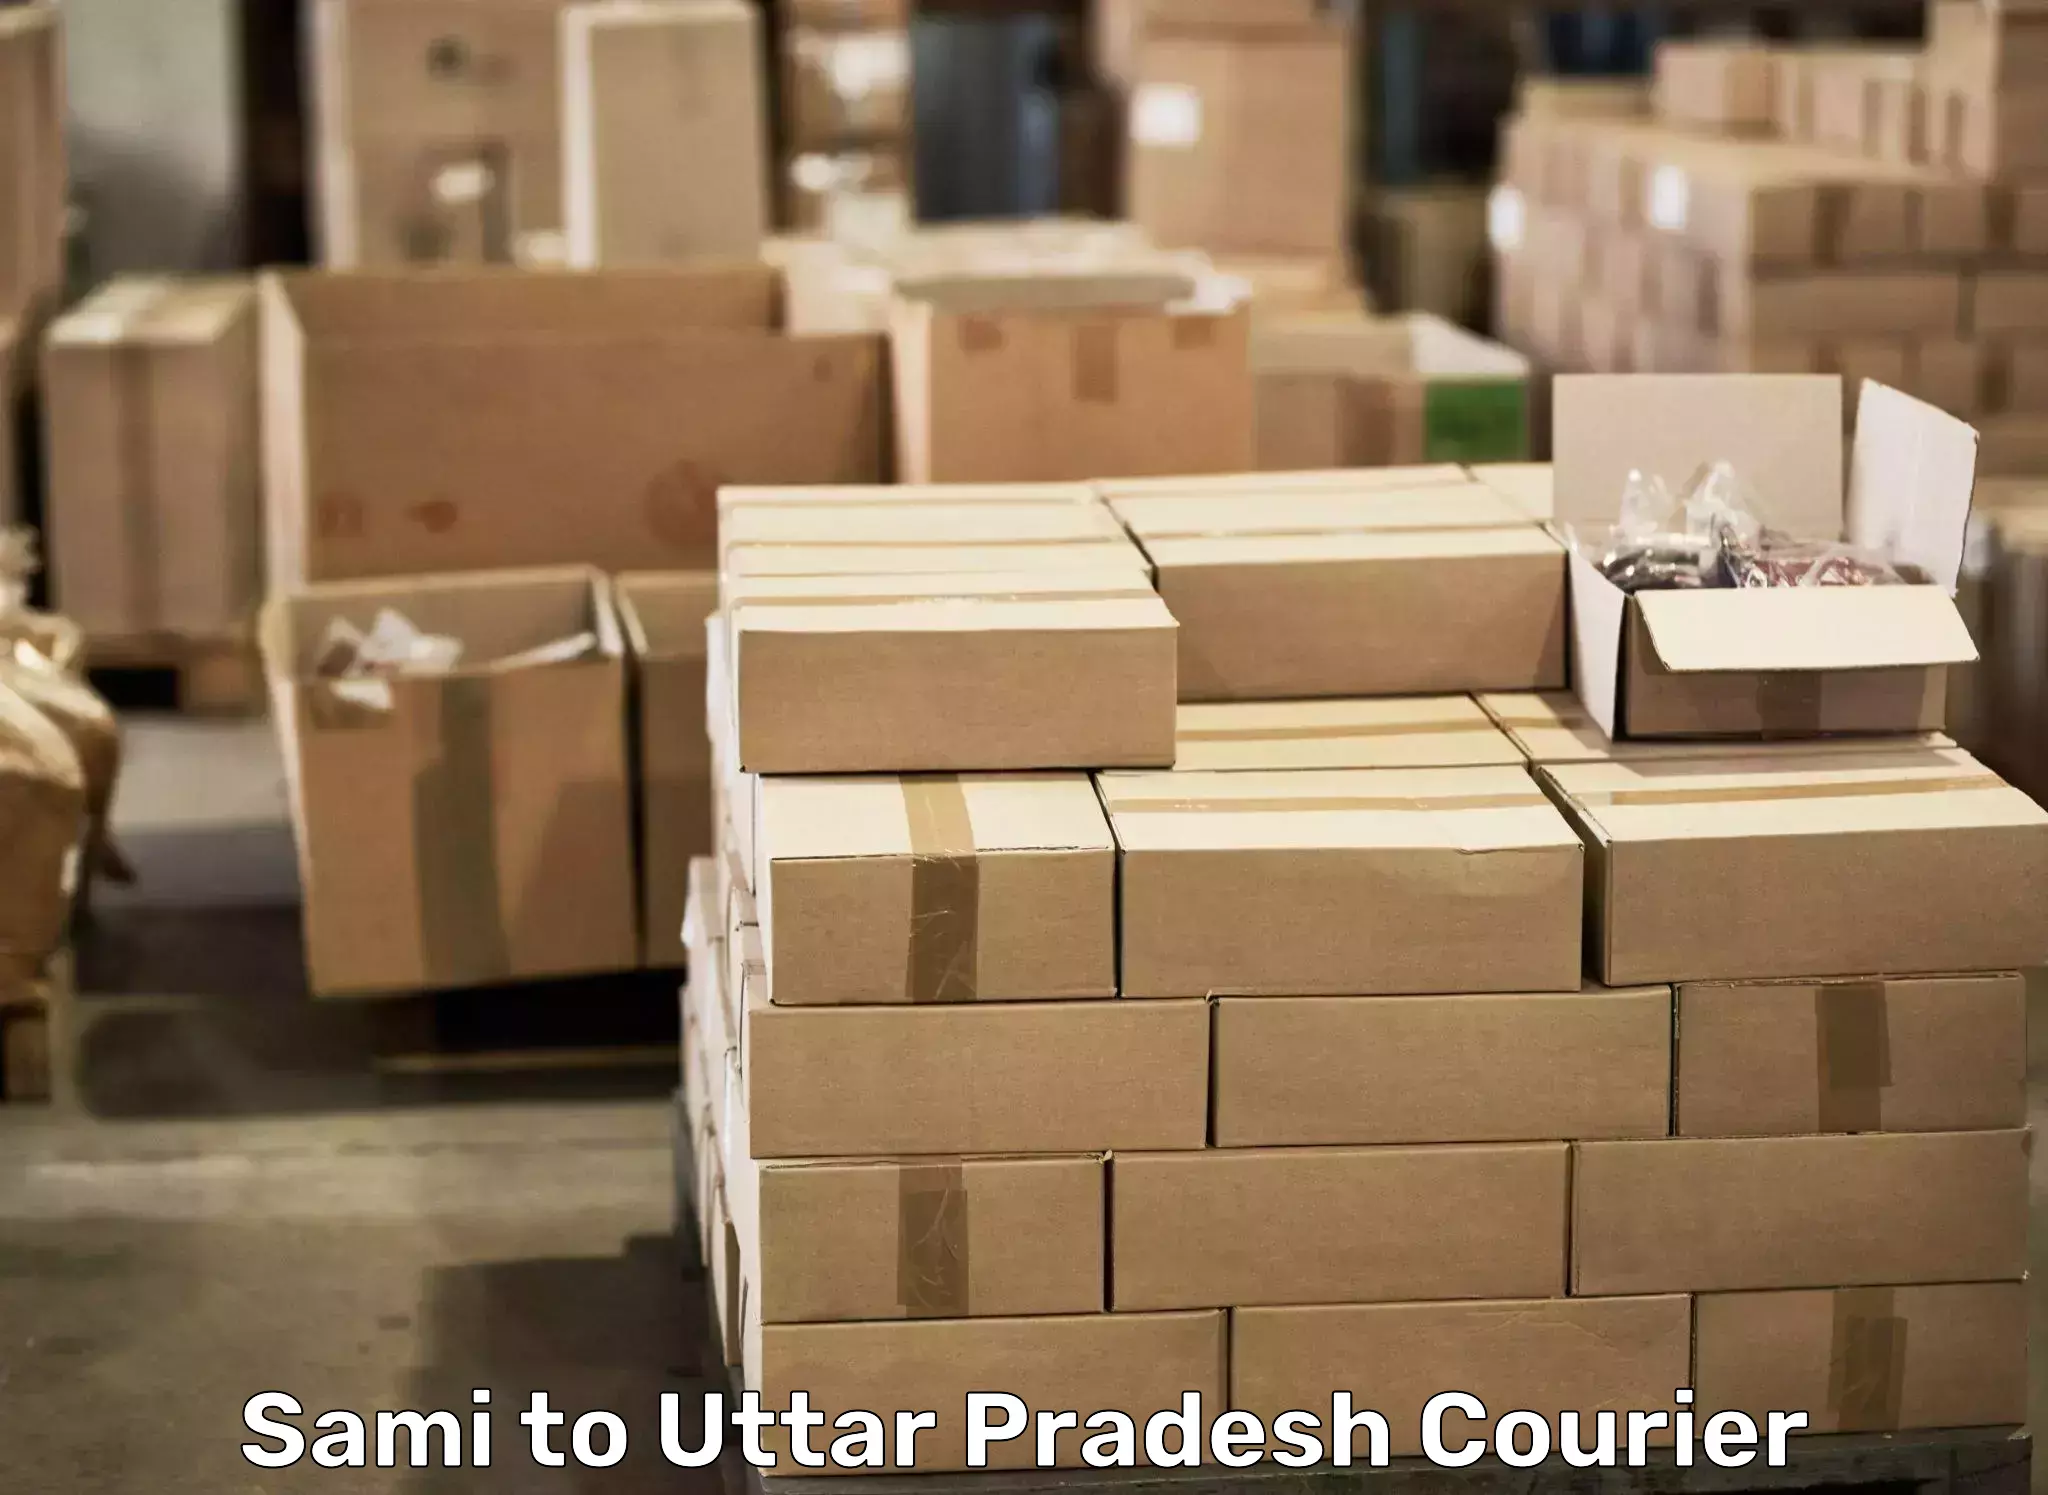 Expert packing and moving Sami to Fatehabad Agra